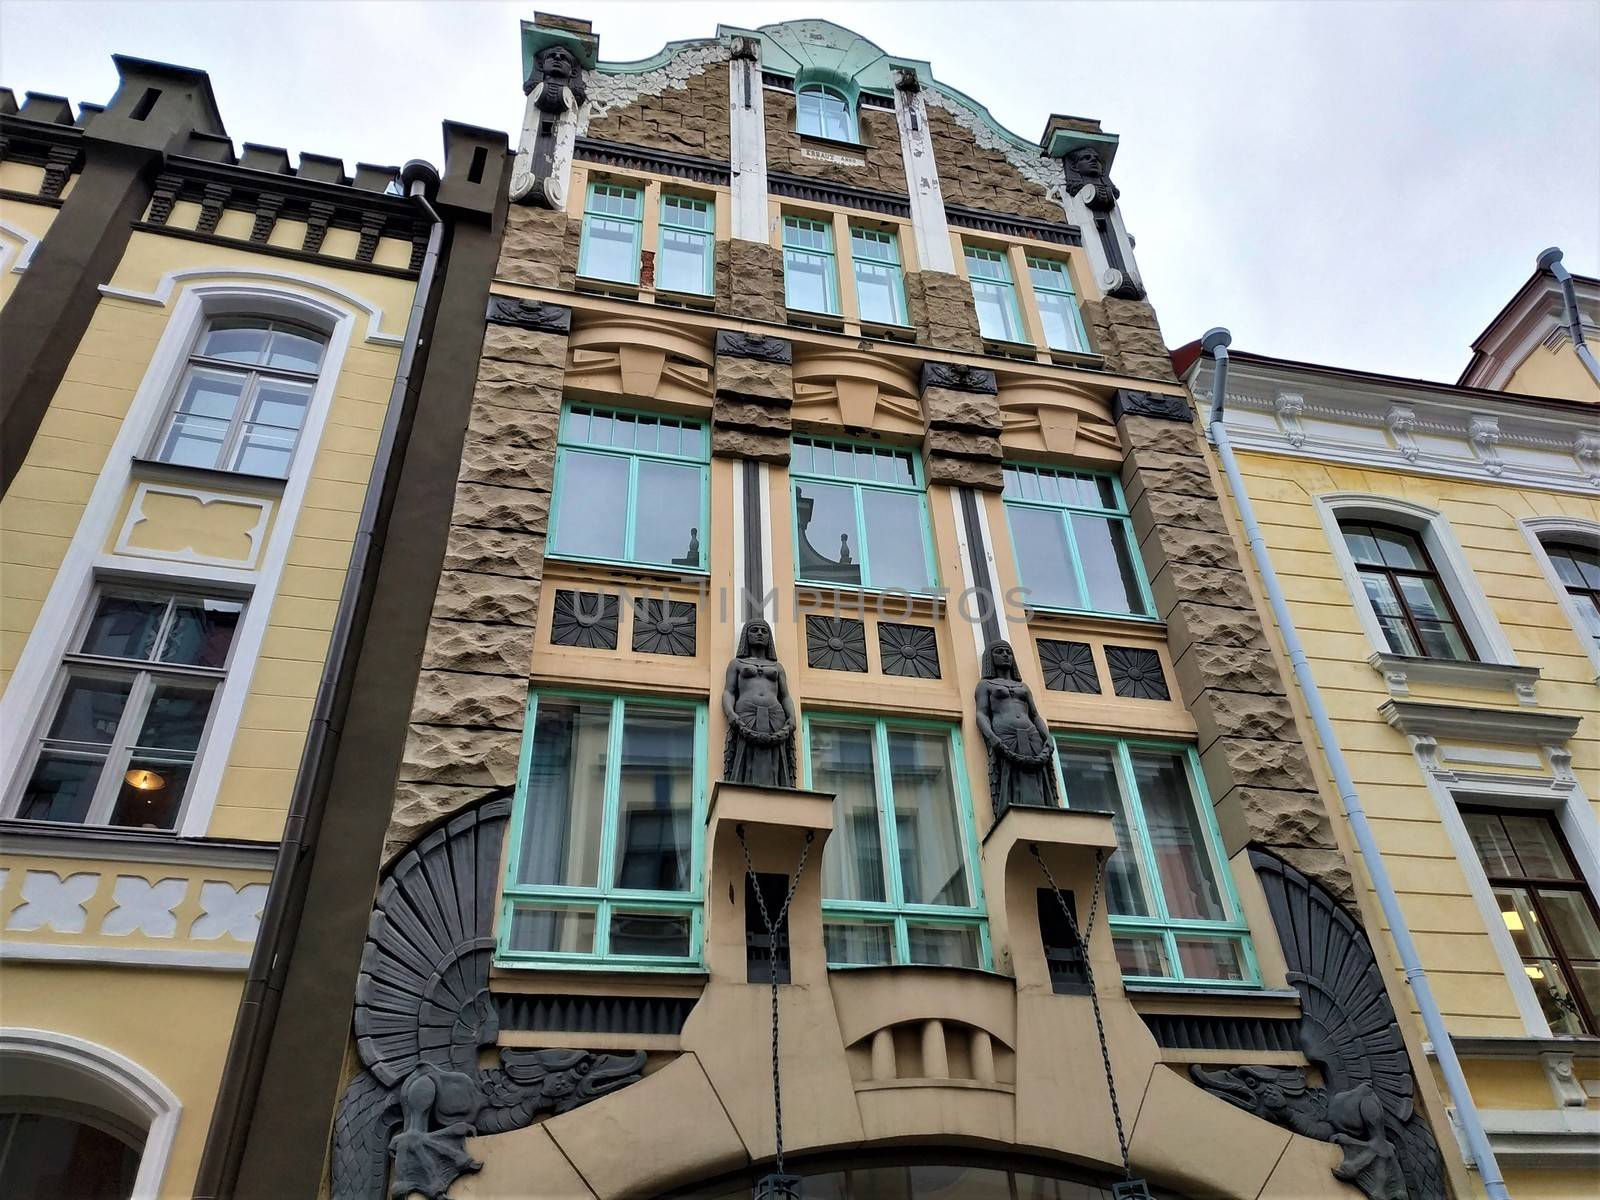 House decorated with dragons and egyptian looking ladies in Tallinn by pisces2386